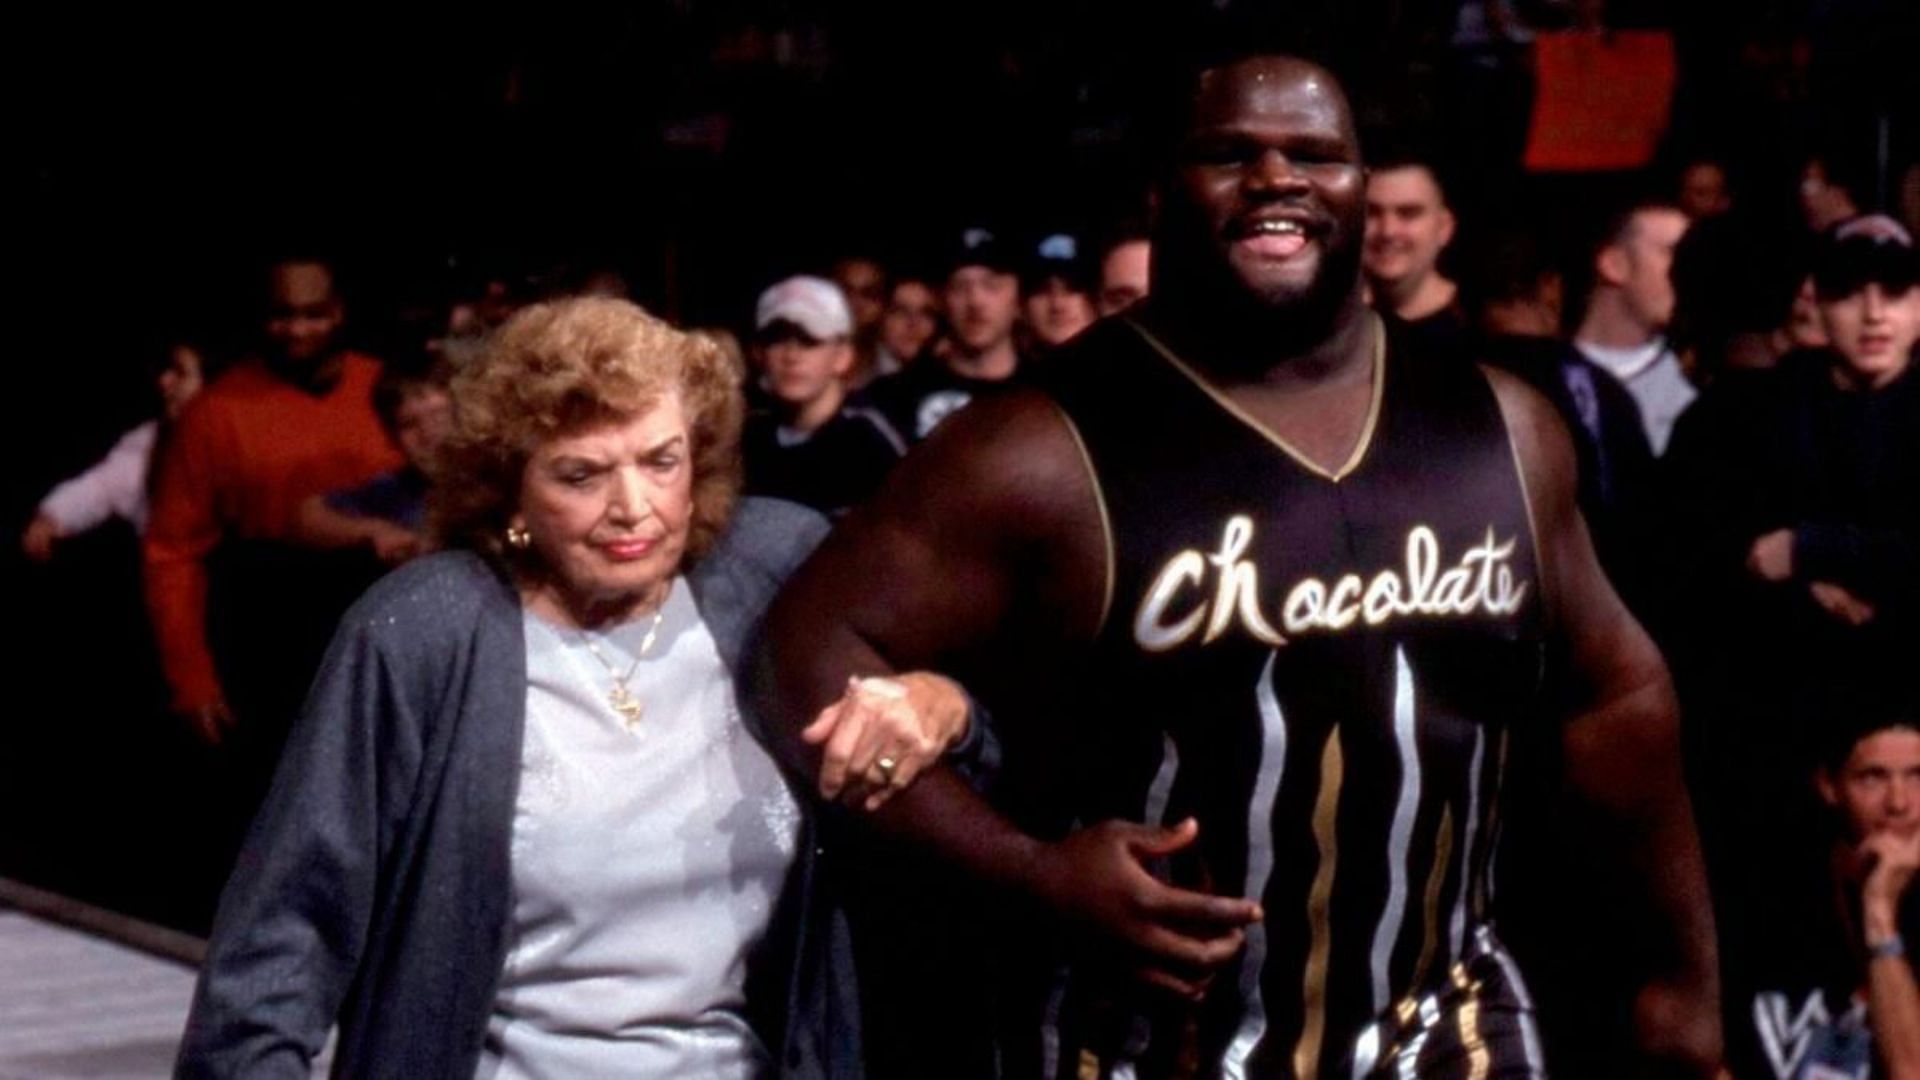 Mark Henry loved working with Mae Young